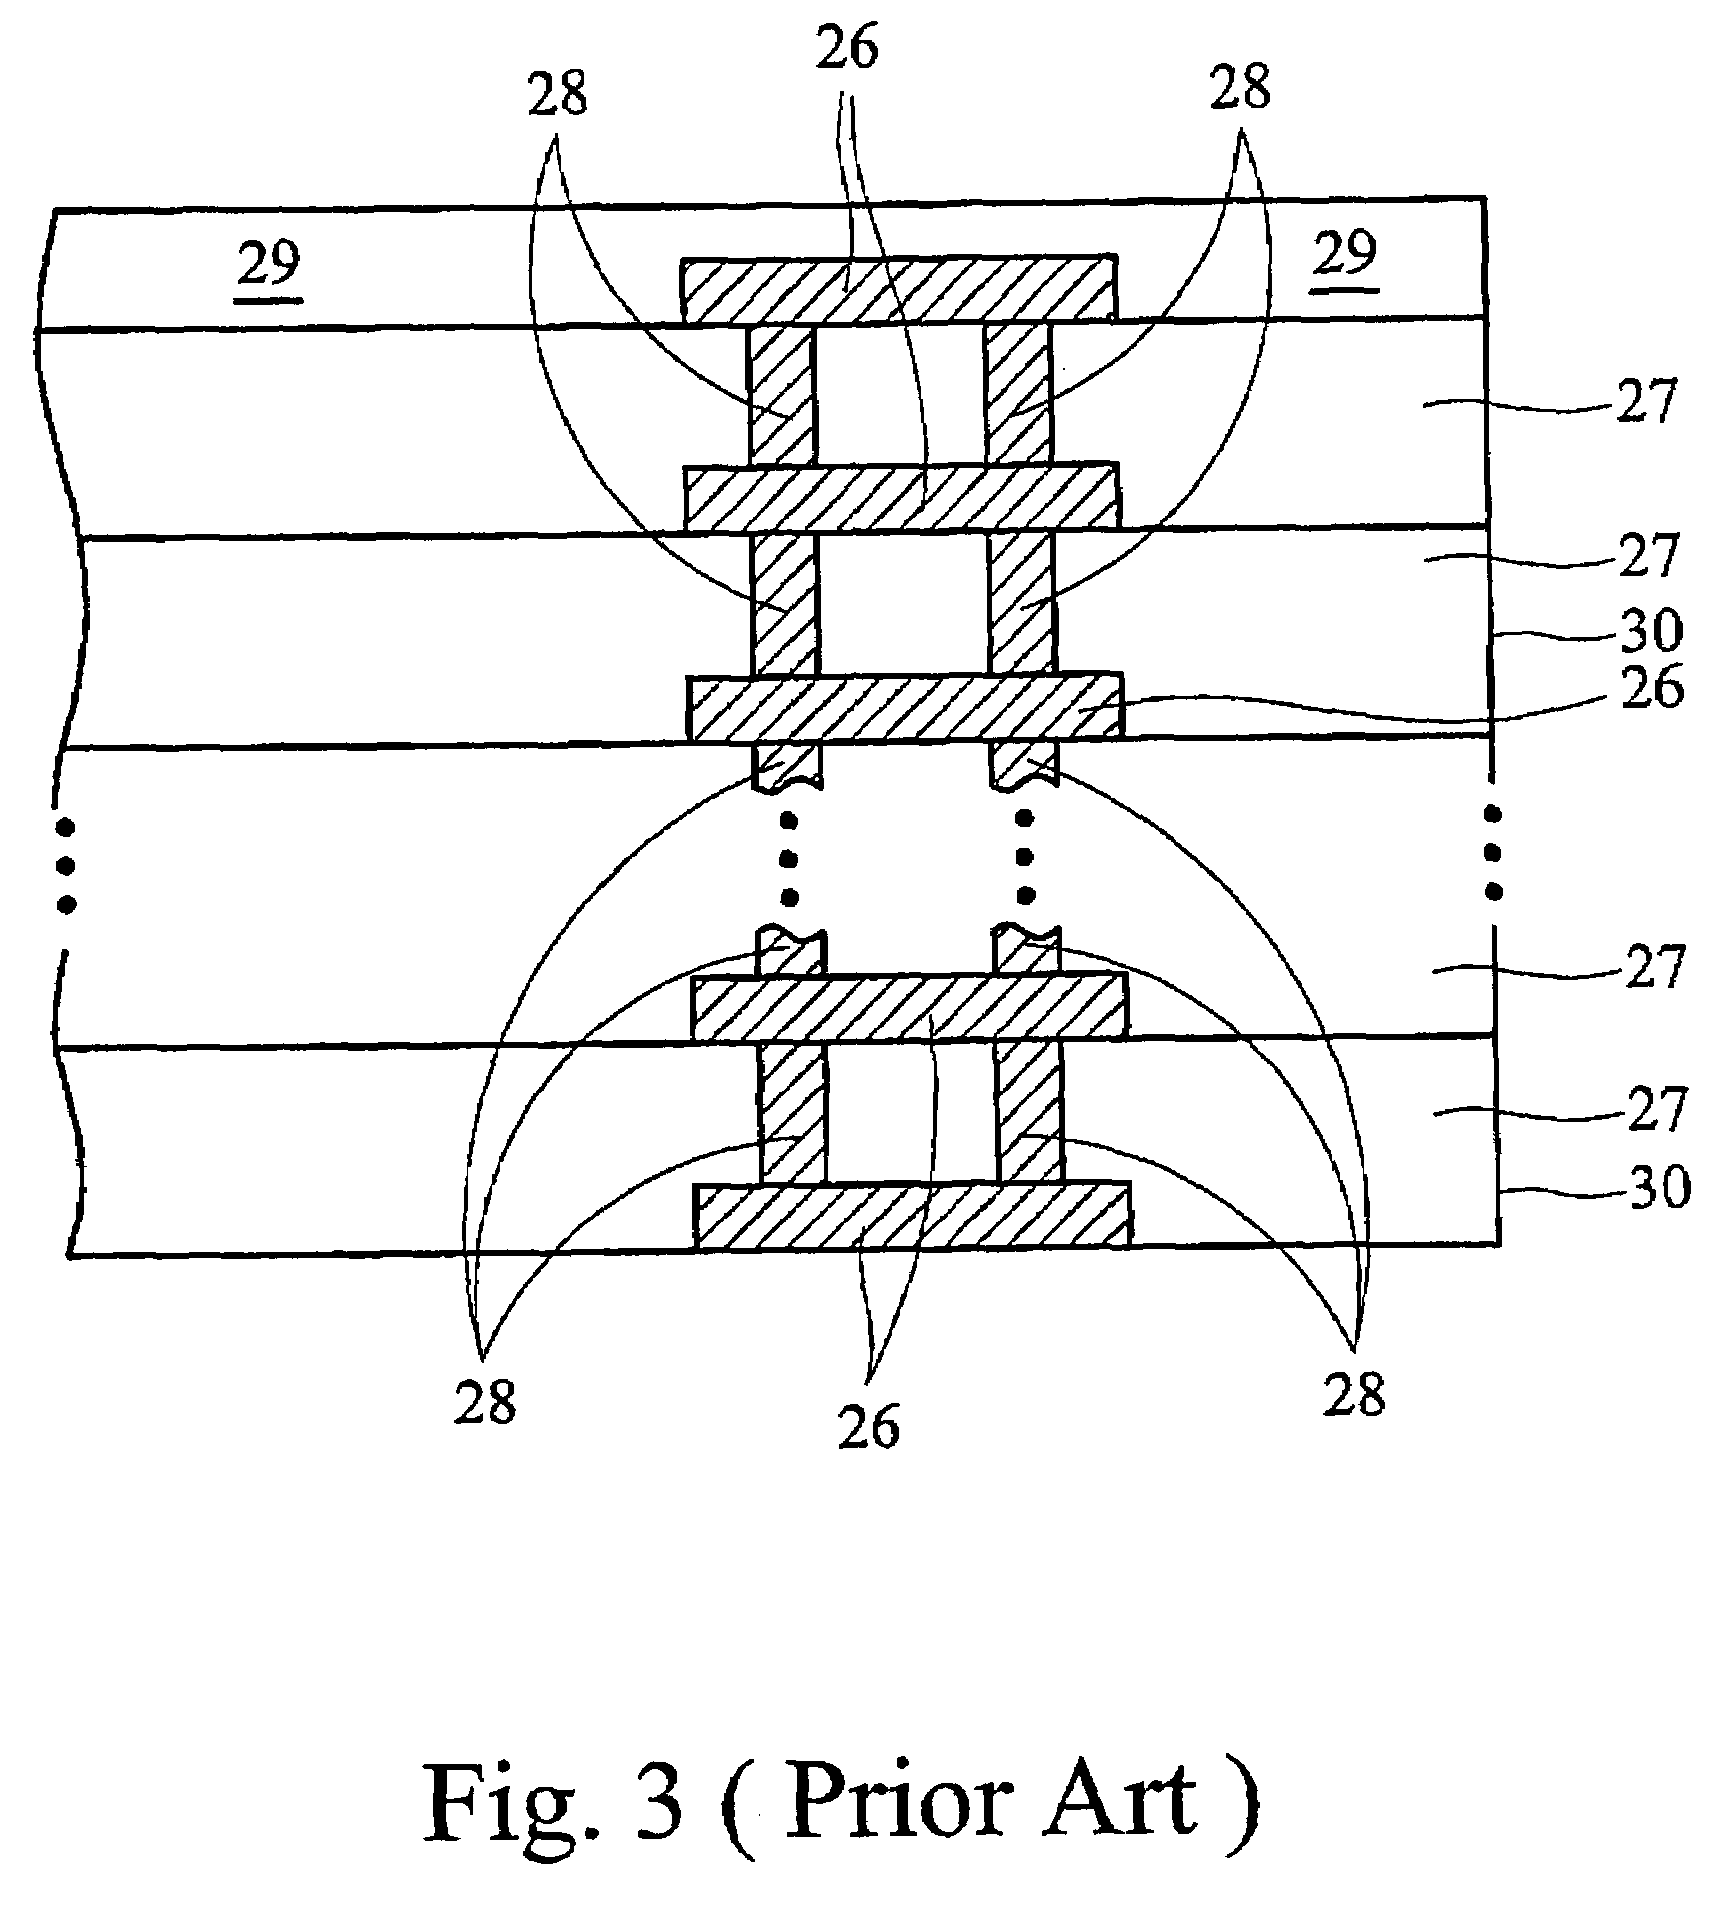 Design structure for coupling noise prevention